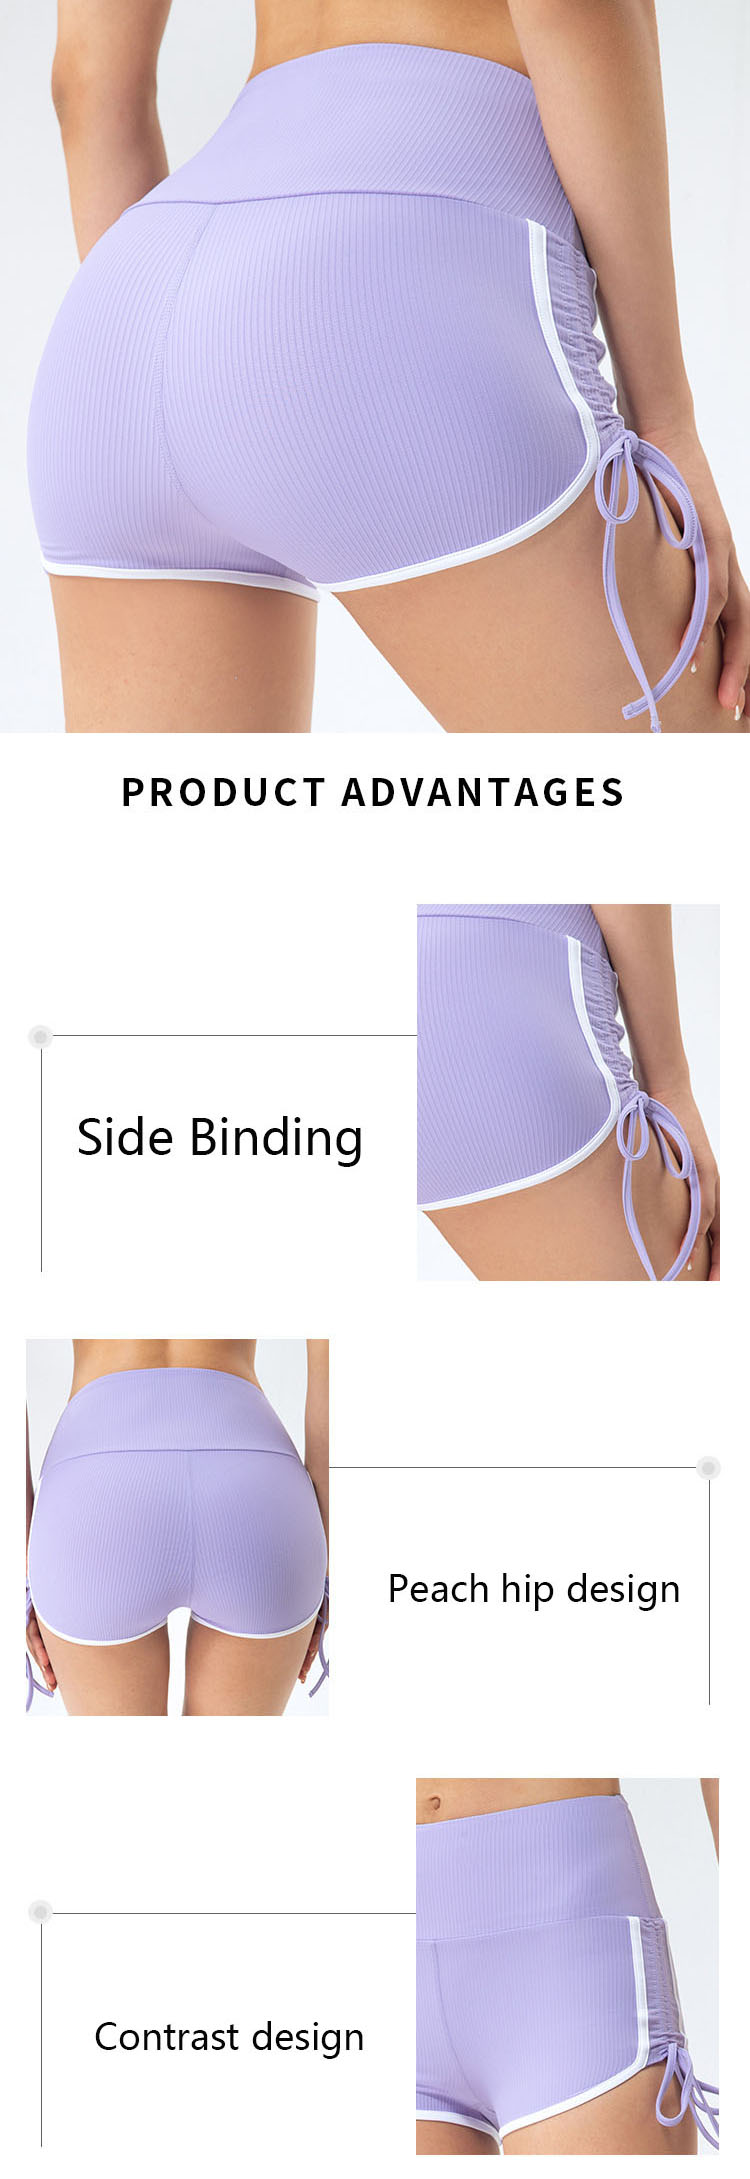 A fake two-piece design with an inner lining to avoid embarrassment and make movement more free and casual.